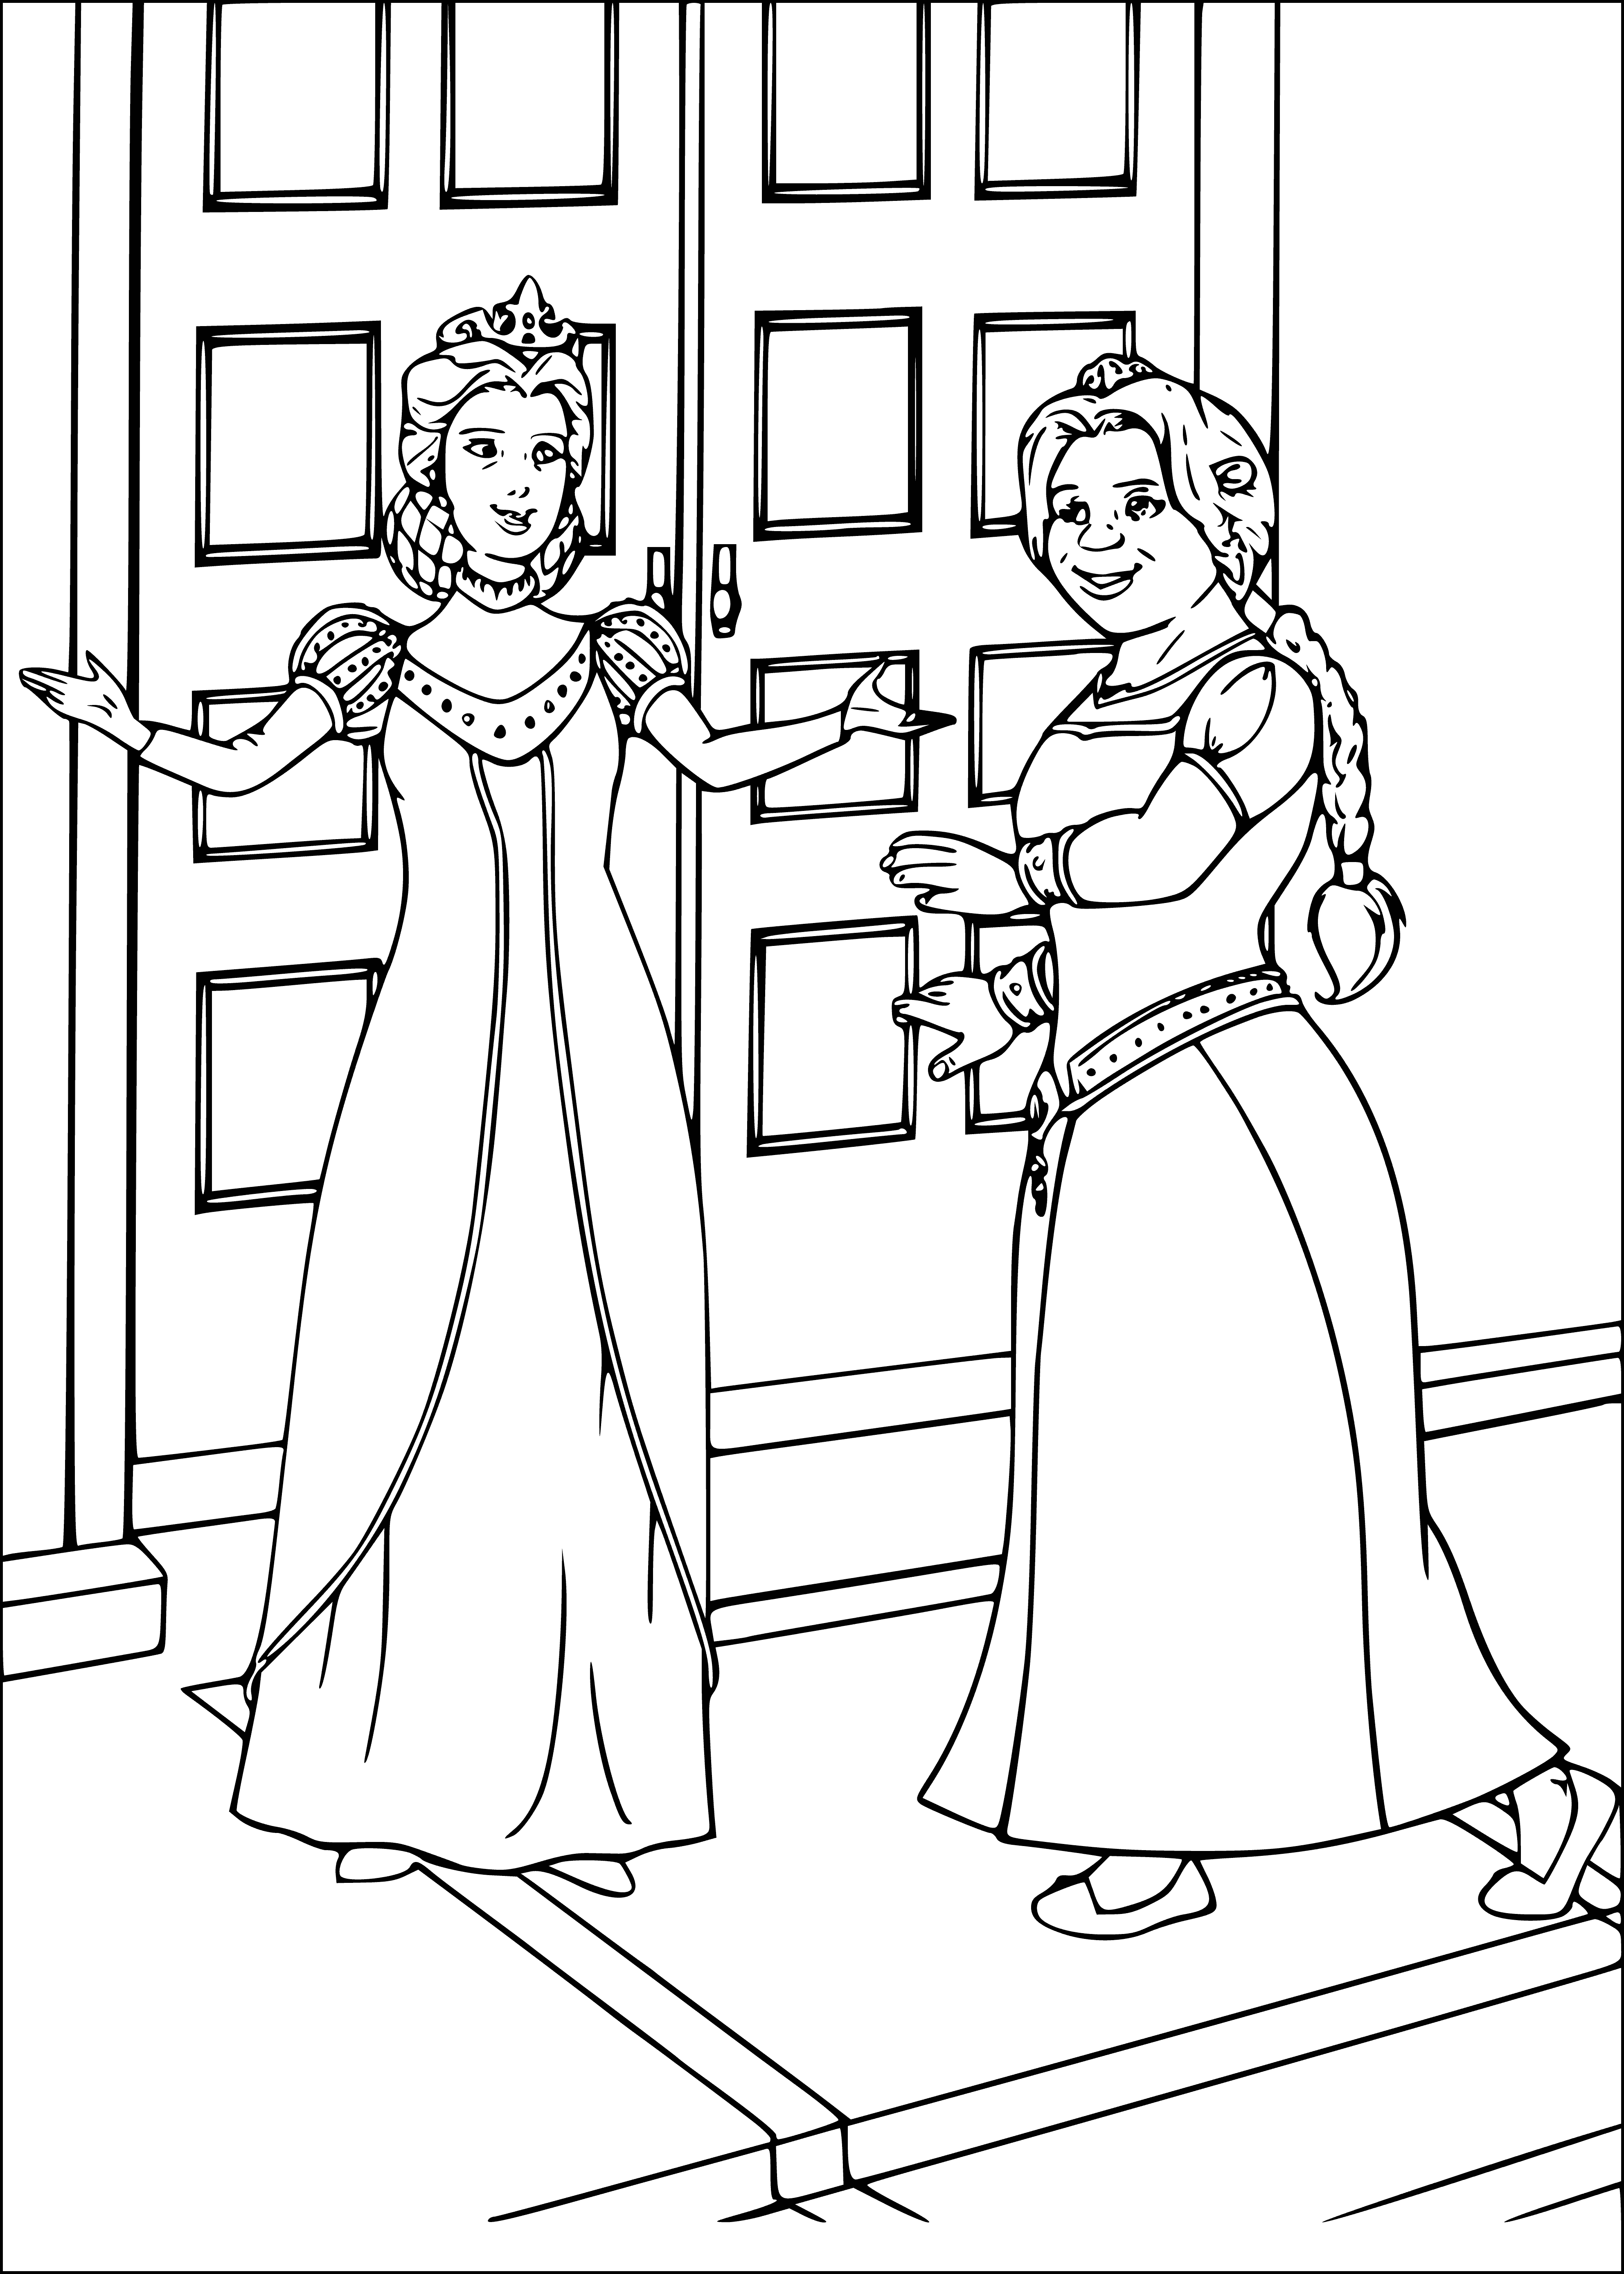 Princess Fiona and her mother coloring page